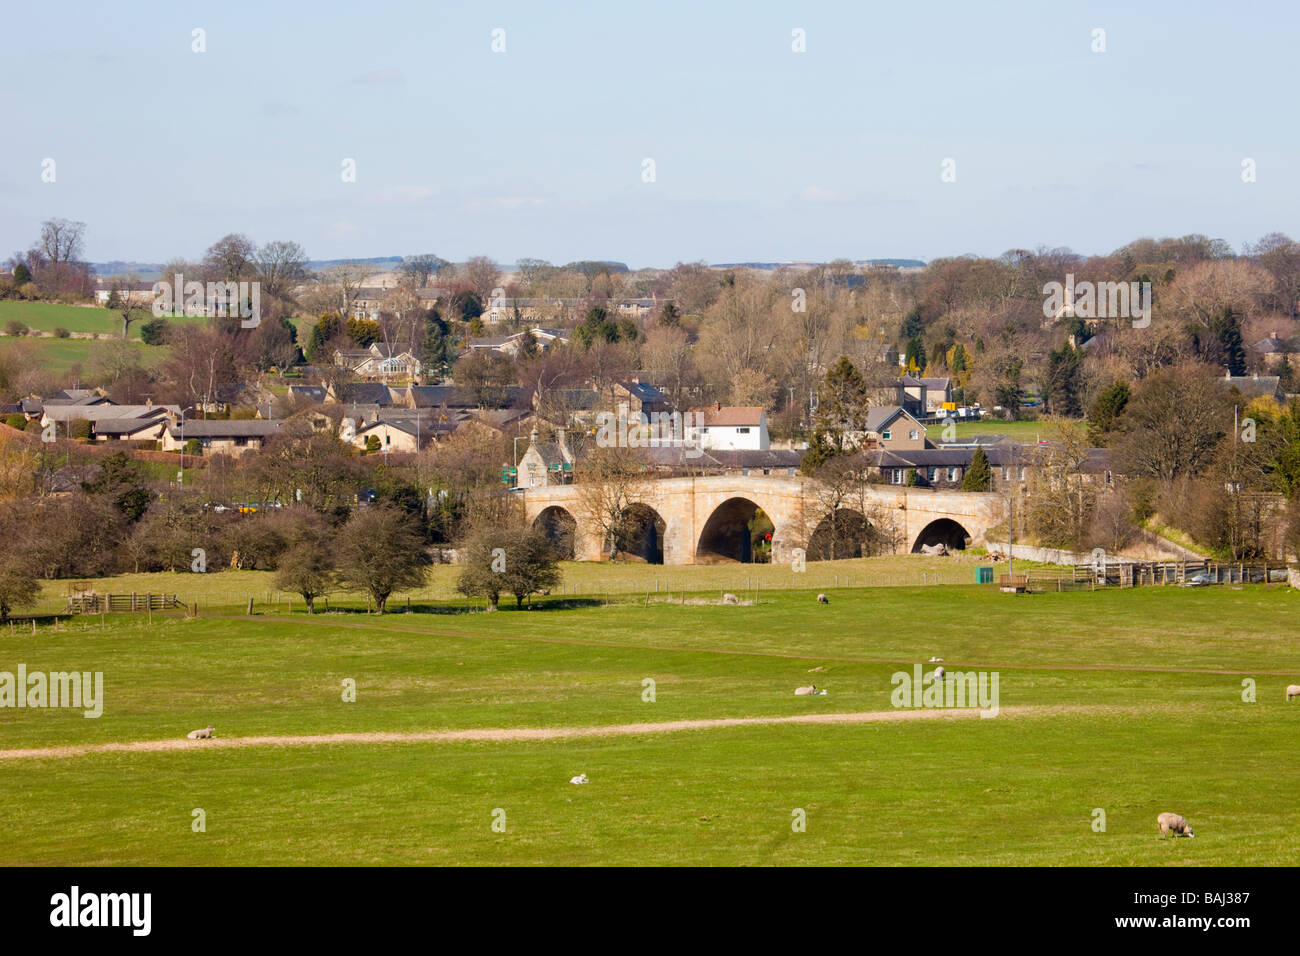 English country scene in North Tyne River valley with sheep grazing and bridge in village. Chollerford Northumberland England UK Stock Photo